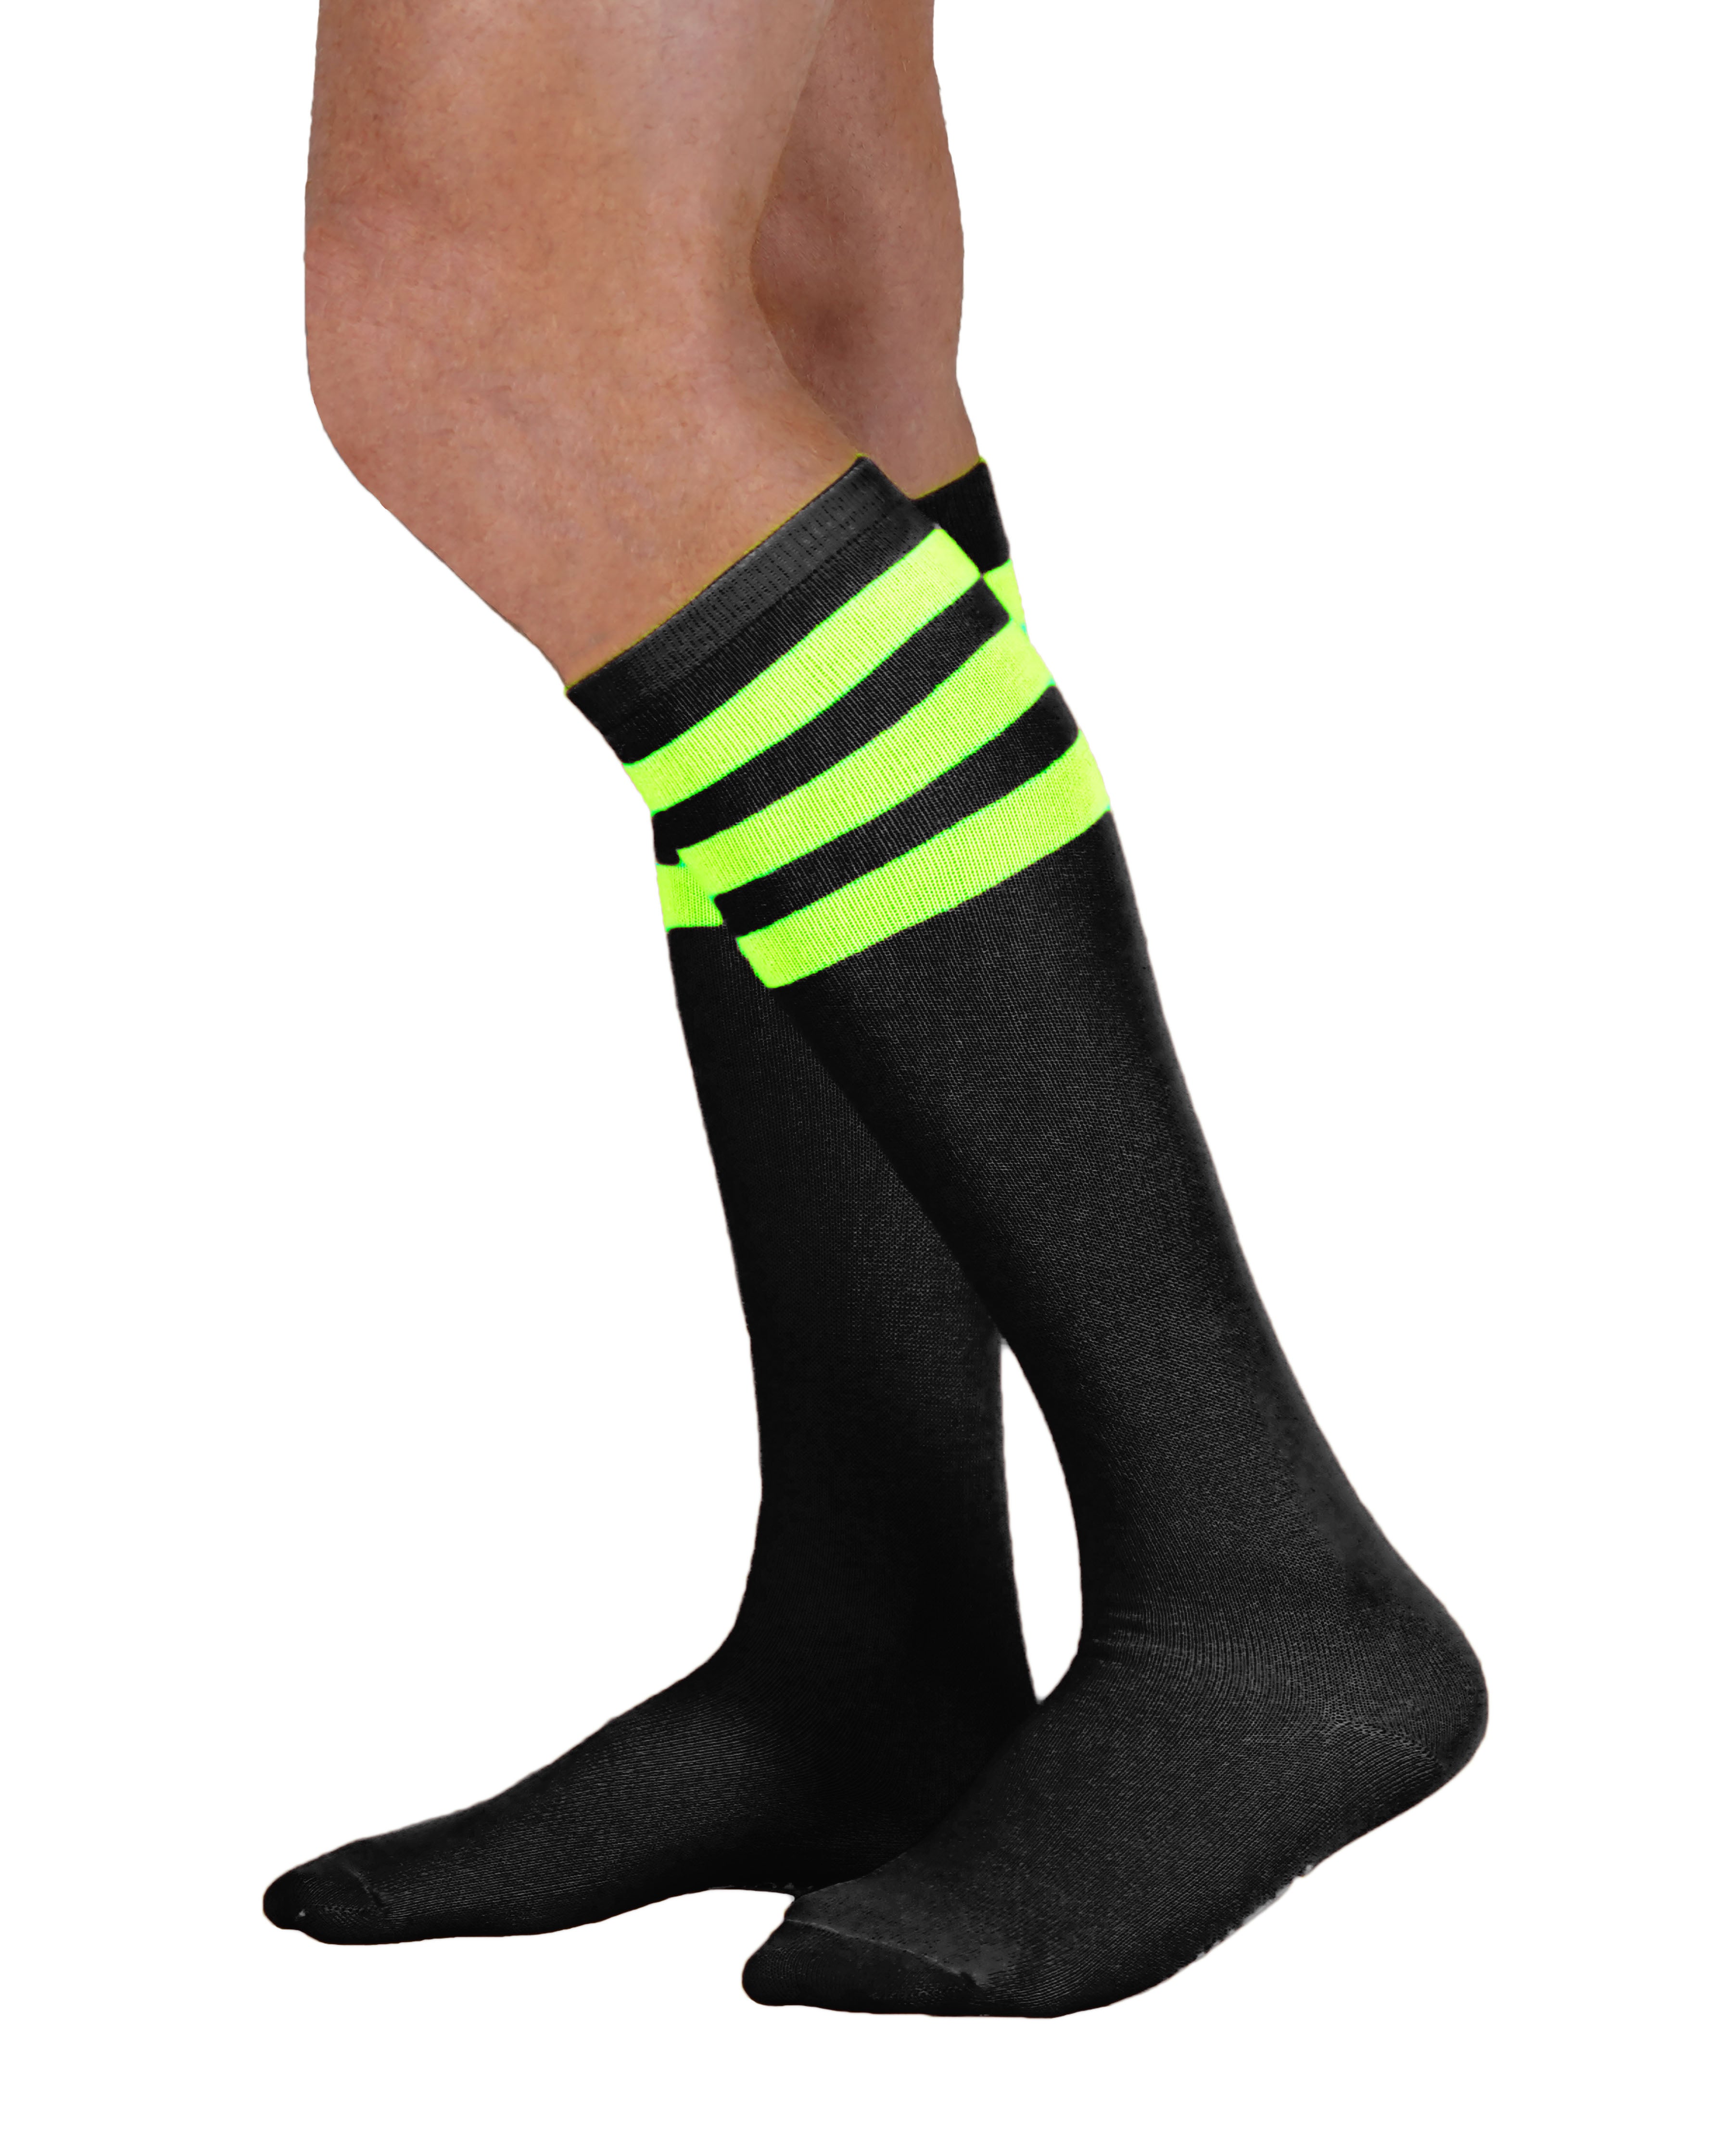 Unisex adult size black knee high tube sock with three neon lime green stripes